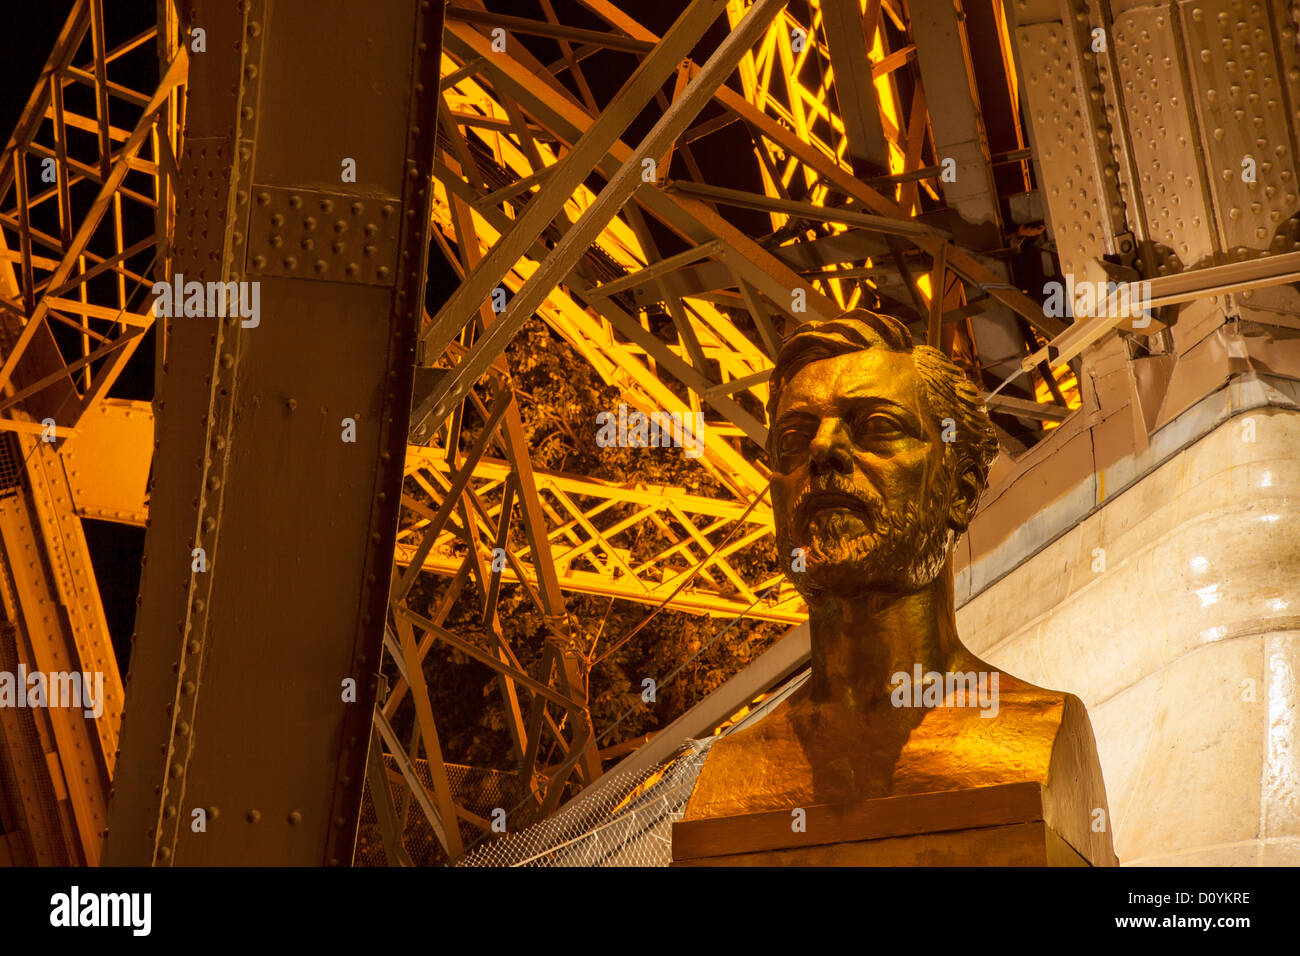 Bronze bust of Gustave Eiffel at the base of the Tower he helped design for the 1889 Worlds Fair, Paris France Stock Photo